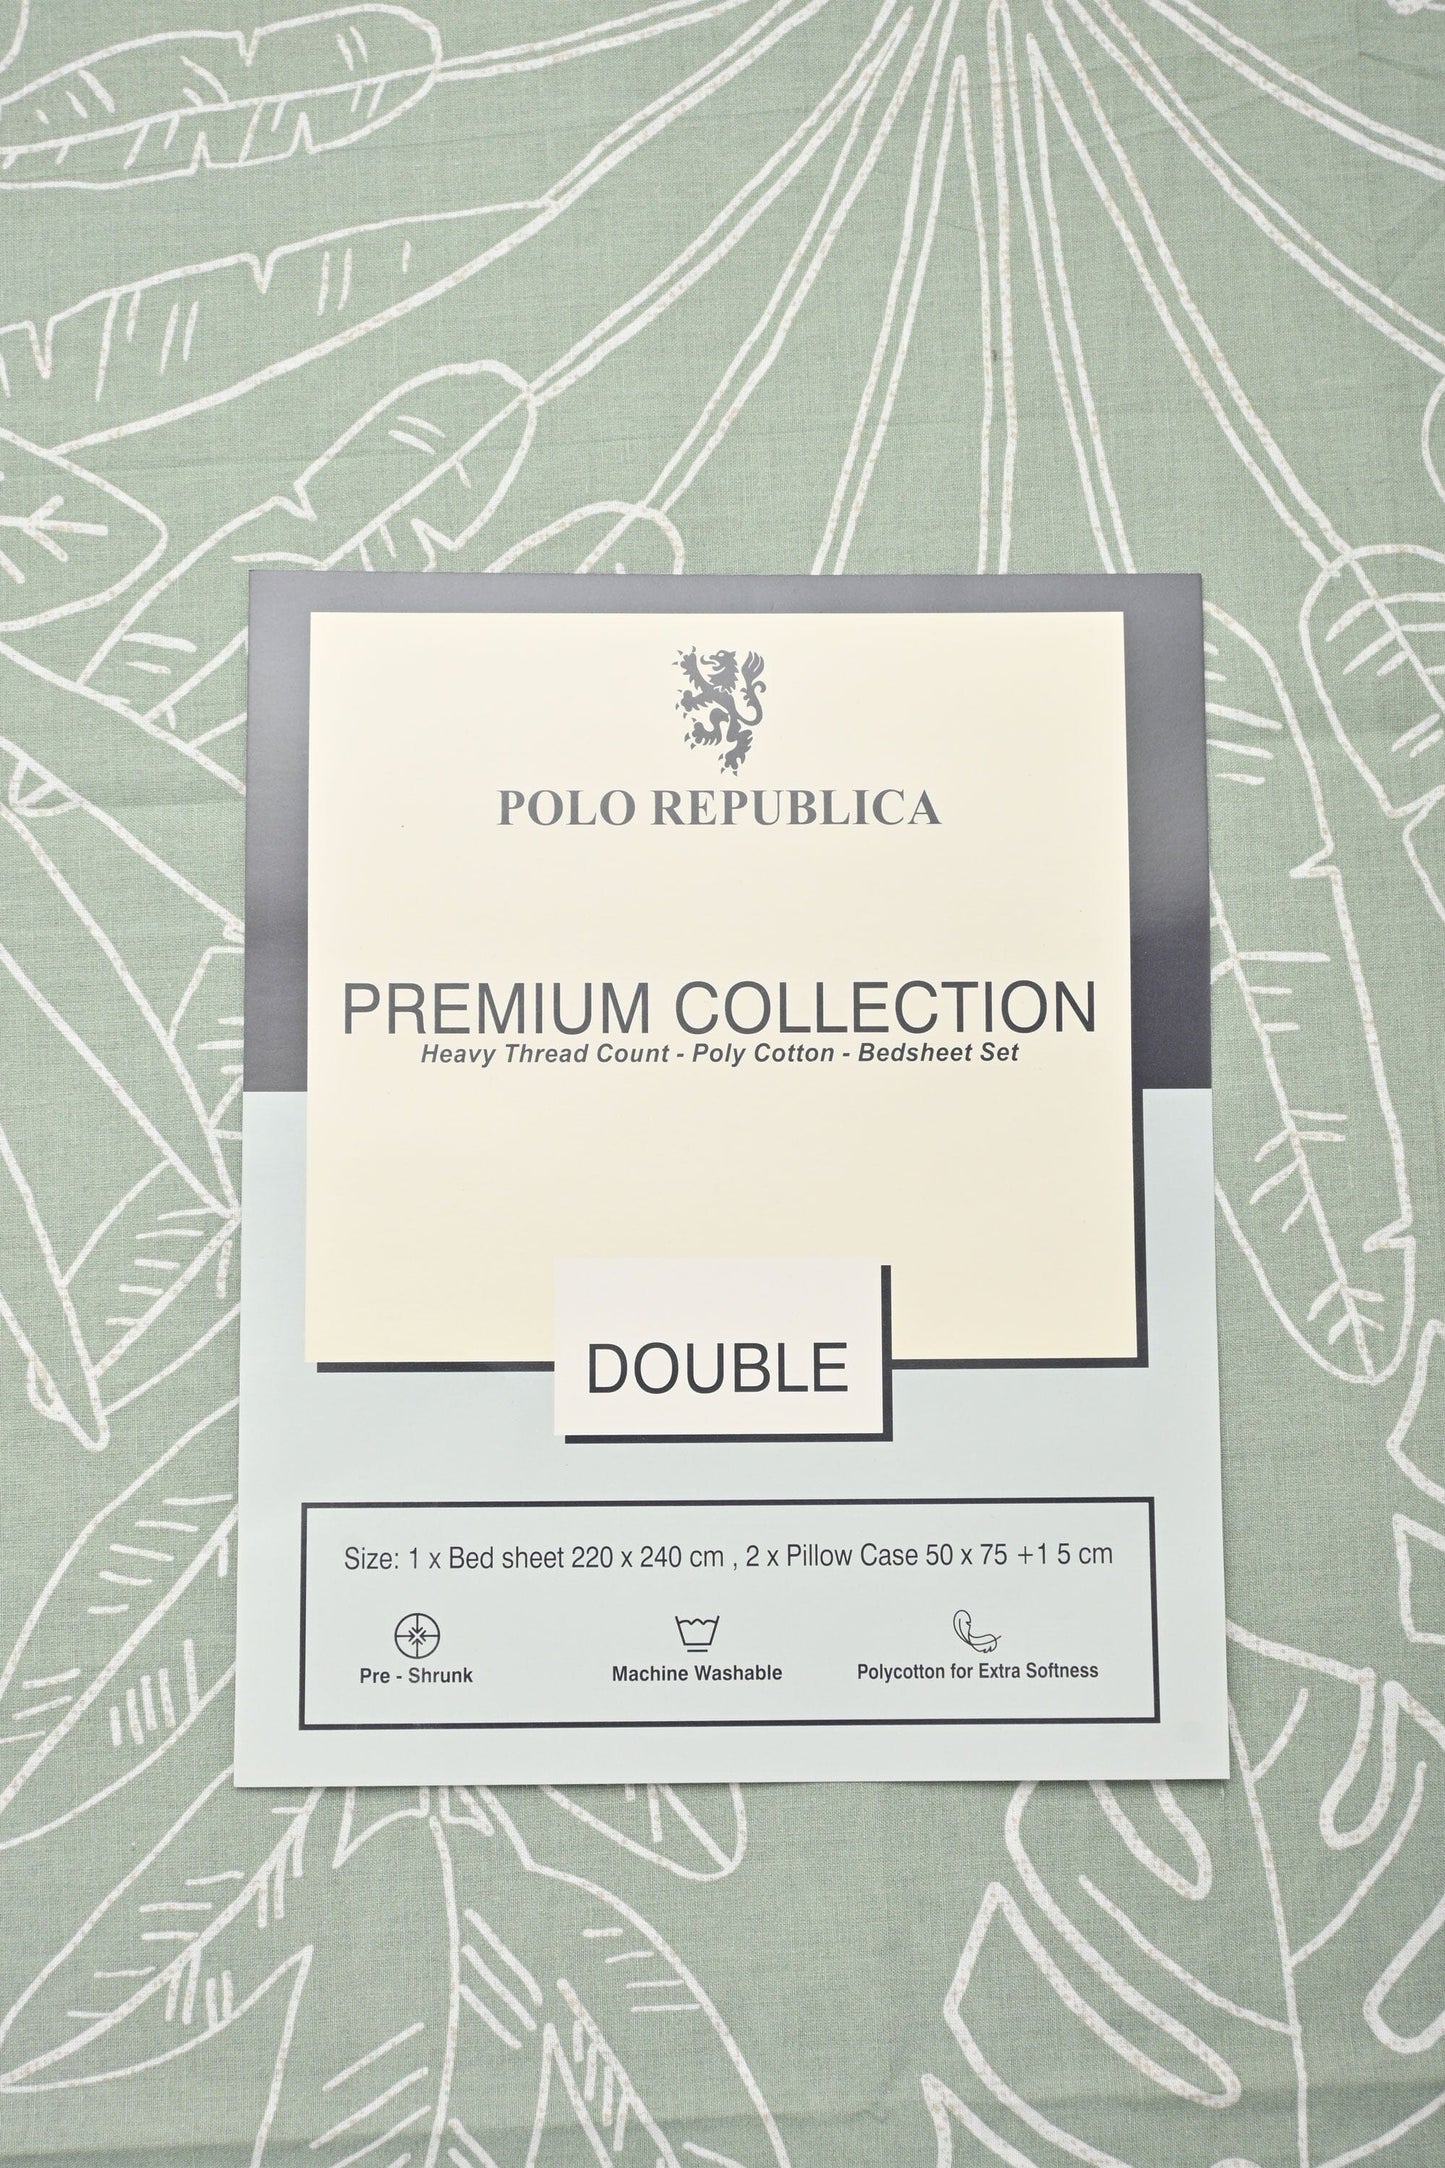 Polo Republica Roskilde Premium Collection 3 Piece Double Bed Sheet Bed Sheet Fiza 